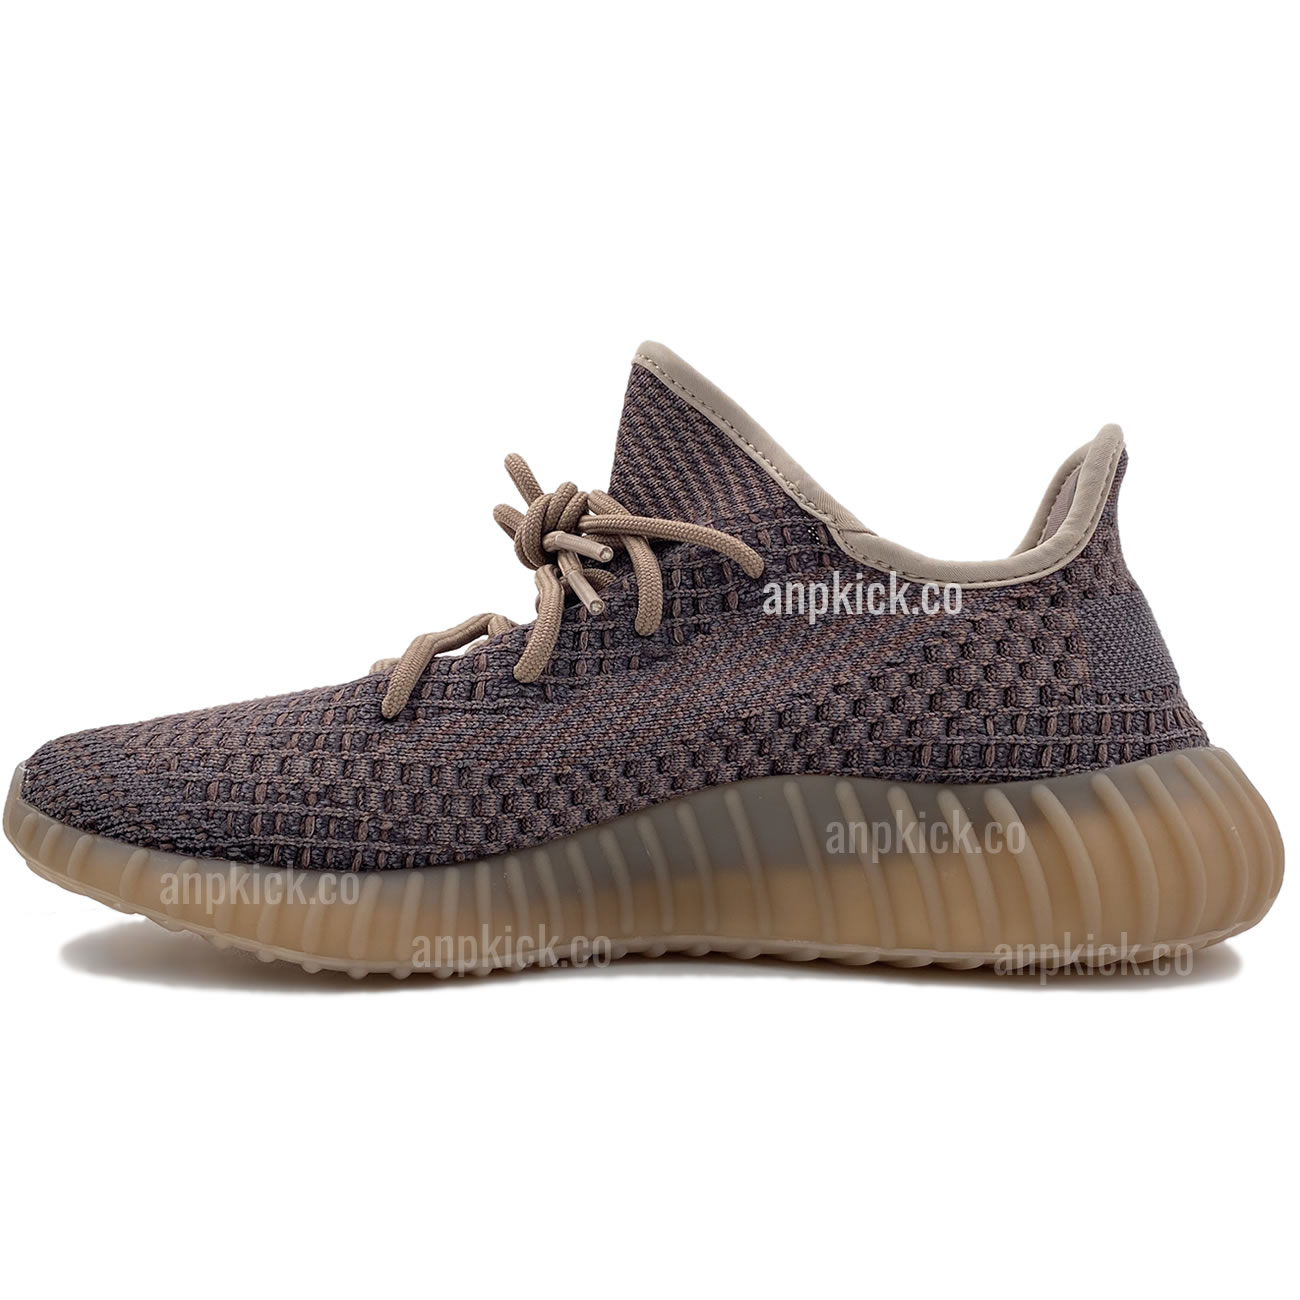 Adidas Yeezy Boost 350 V2 Yecher Ho2795 New Release Date First Look (3) - www.newkick.org